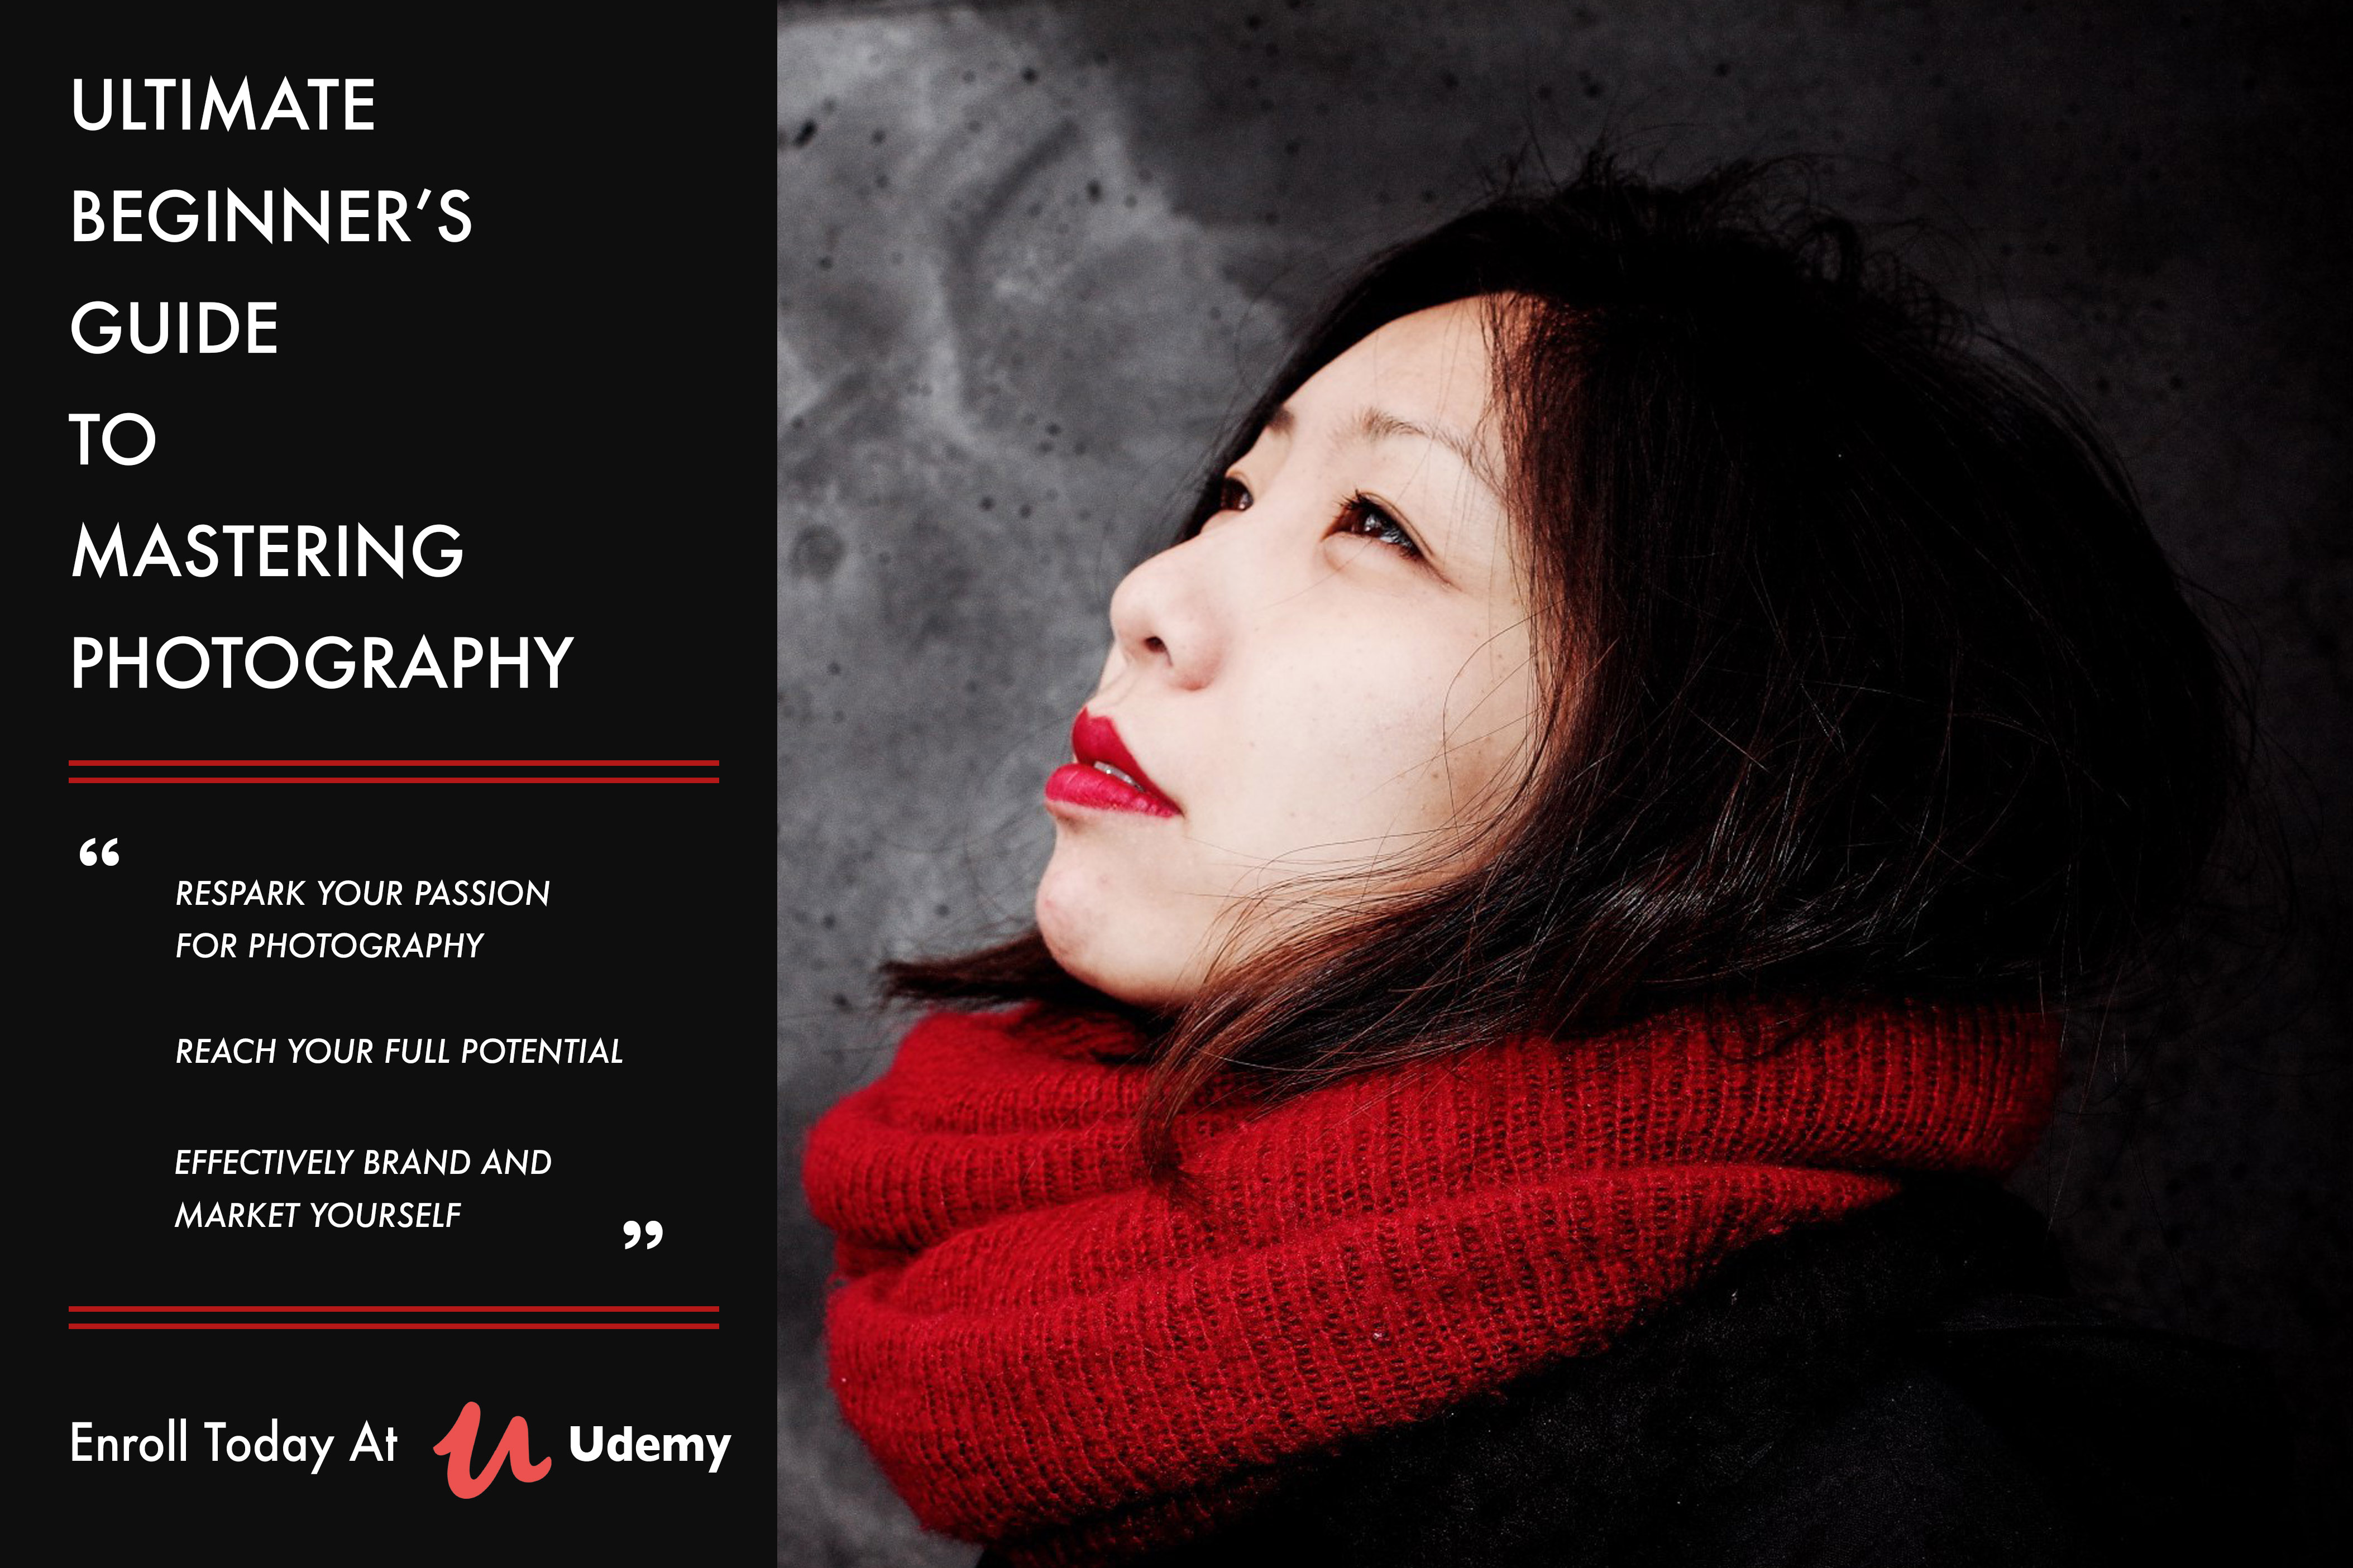 "Ultimate Beginner’s Guide to Mastering Photography" now live on Udemy!